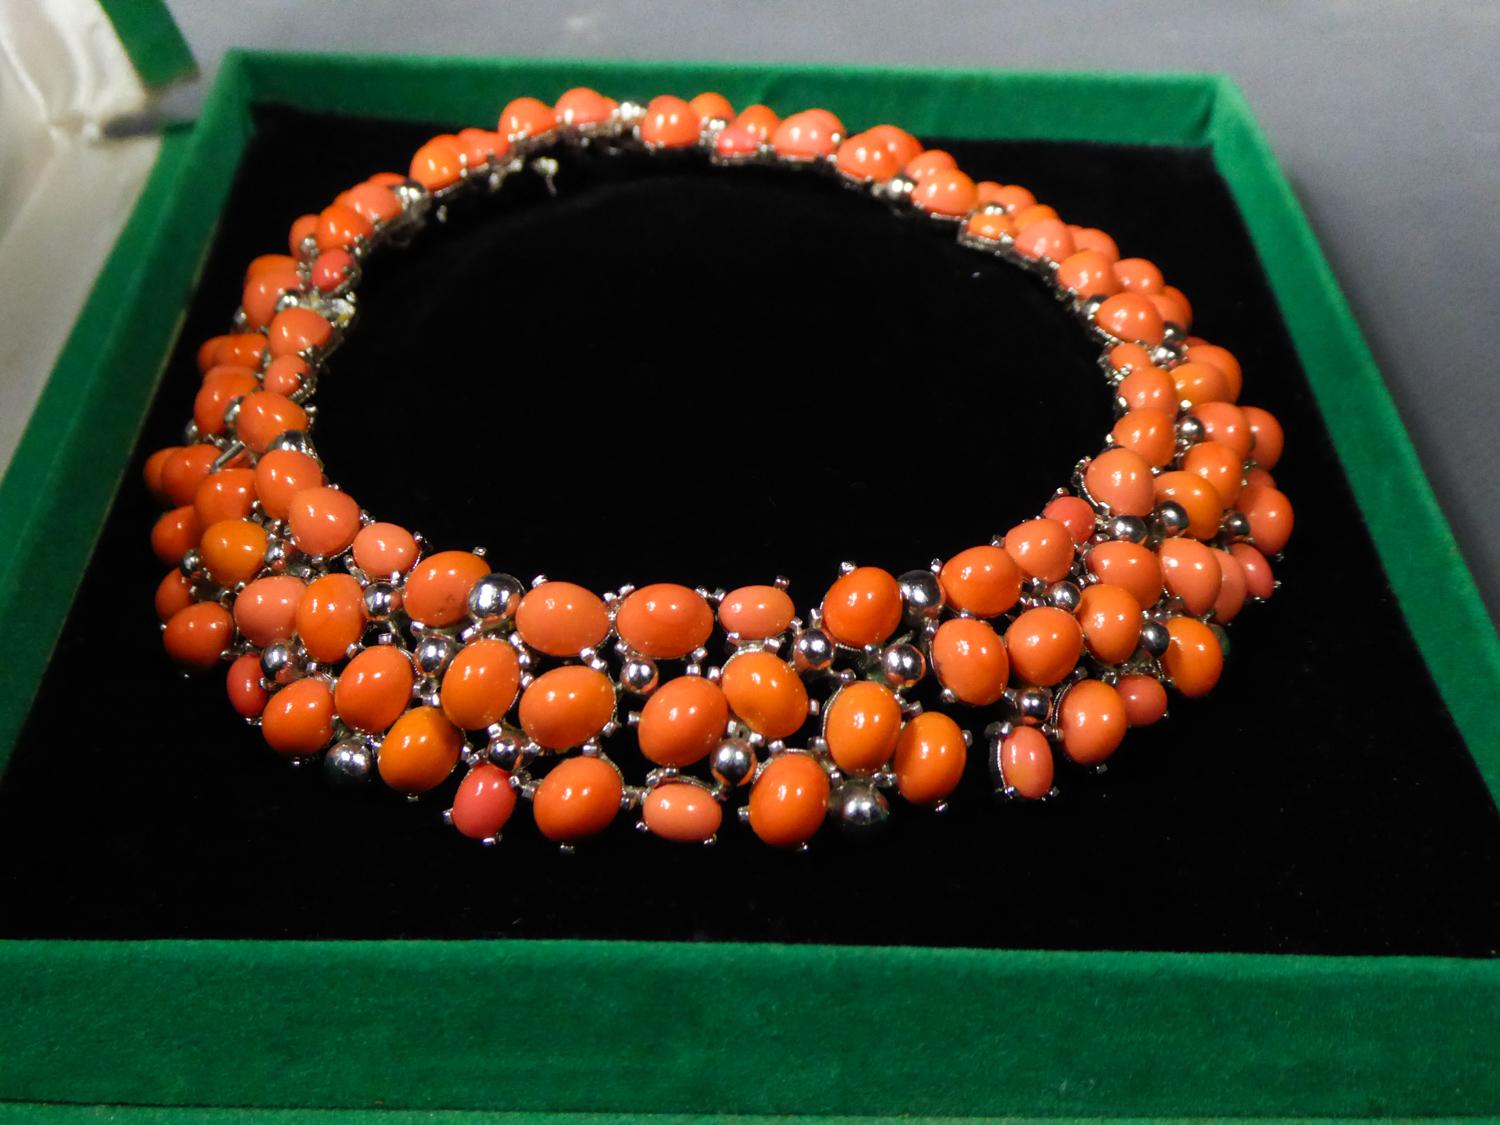 Women's A Carven Haute Couture Necklace in glass Beads Circa 1960/1970